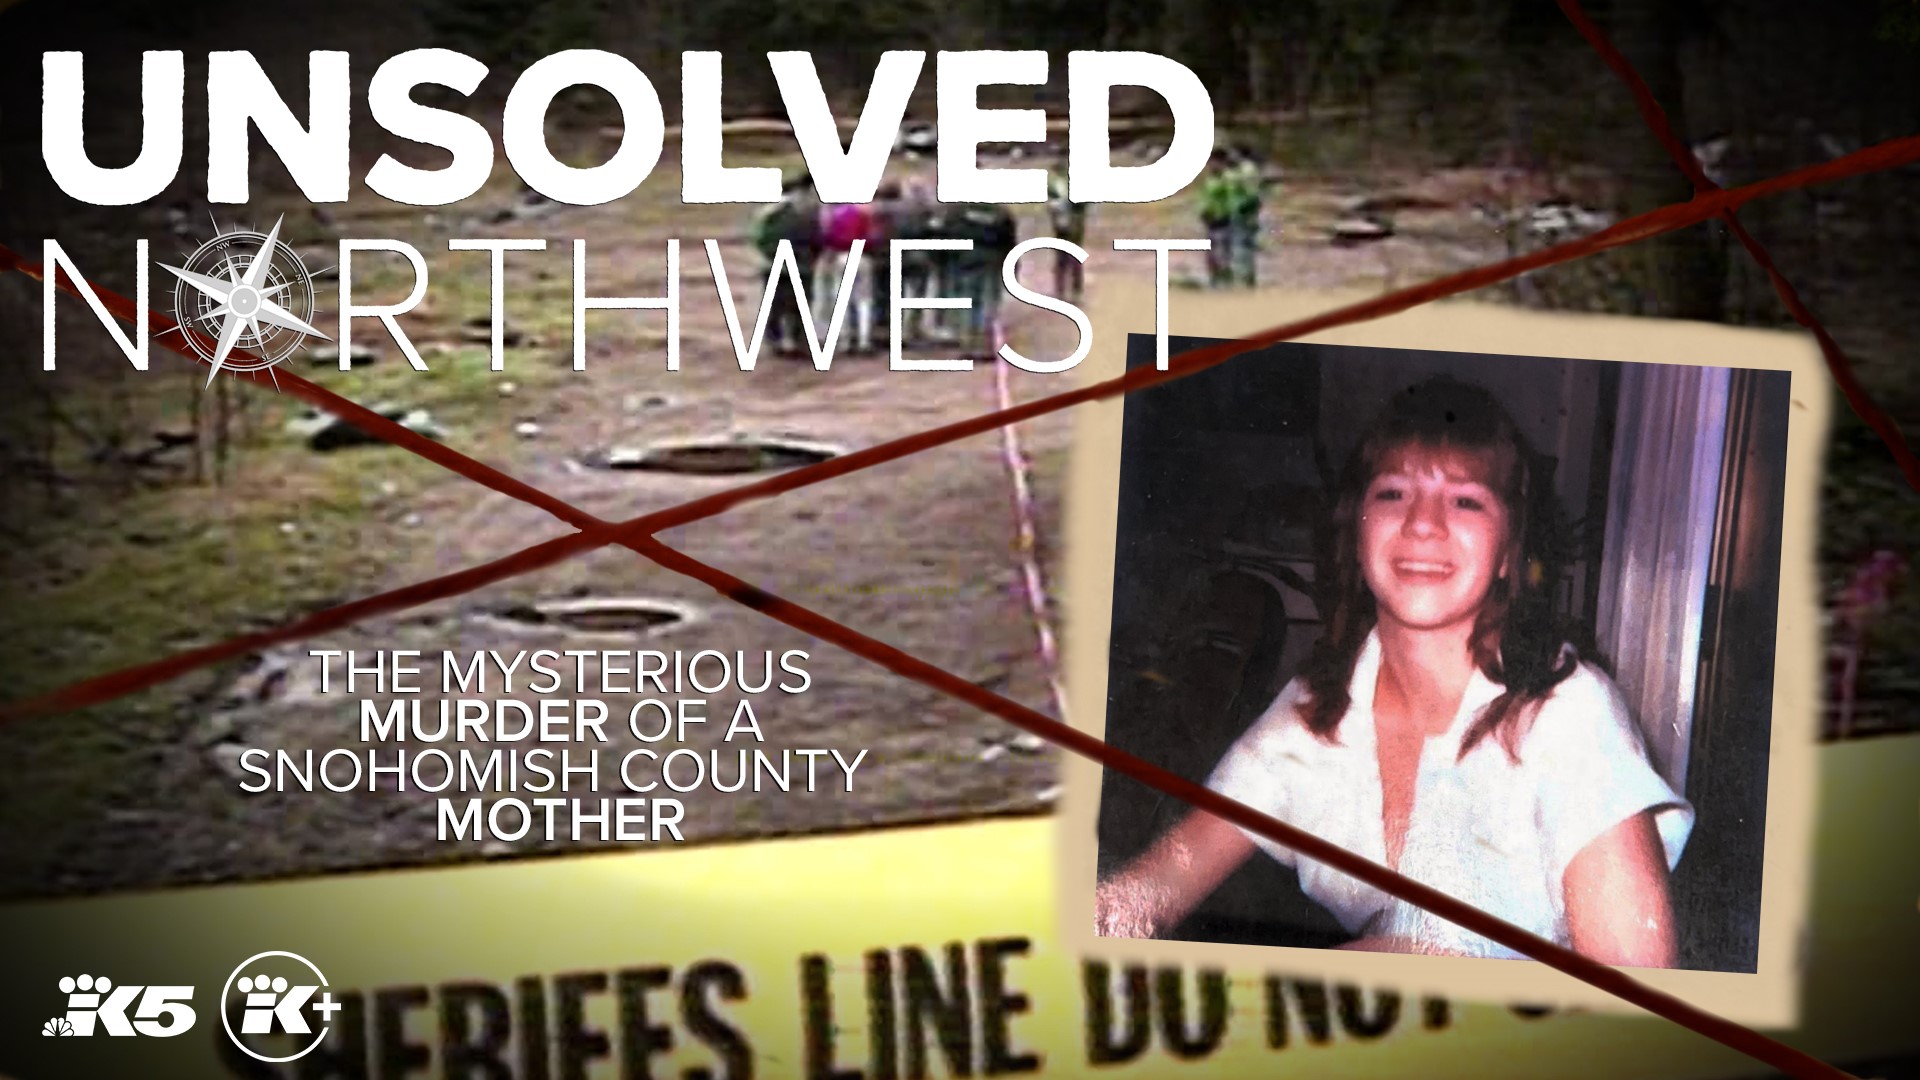 The single mother of two vanished in June of 1991. Her body was found in an illegal garbage dump in Edmonds in February 1992.